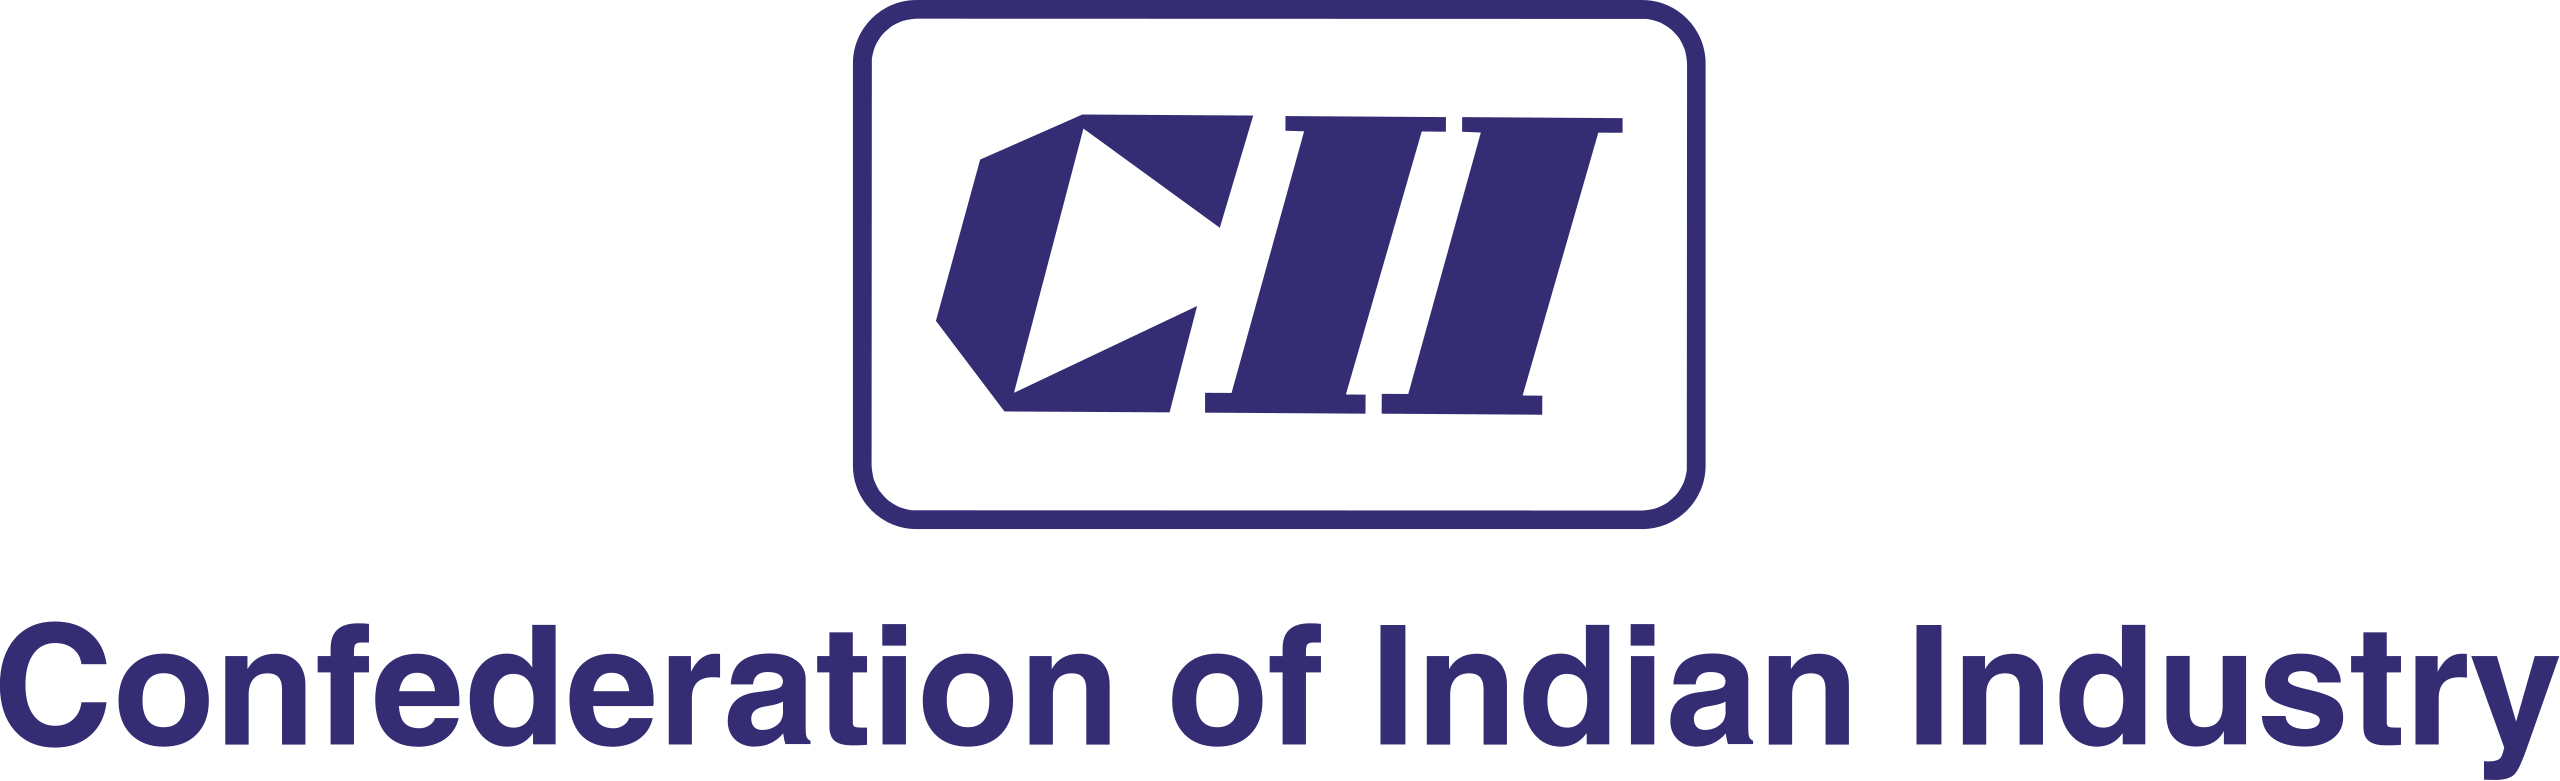 Official_logo_of_the_Confederation_of_Indian_Industry_(CII).svg